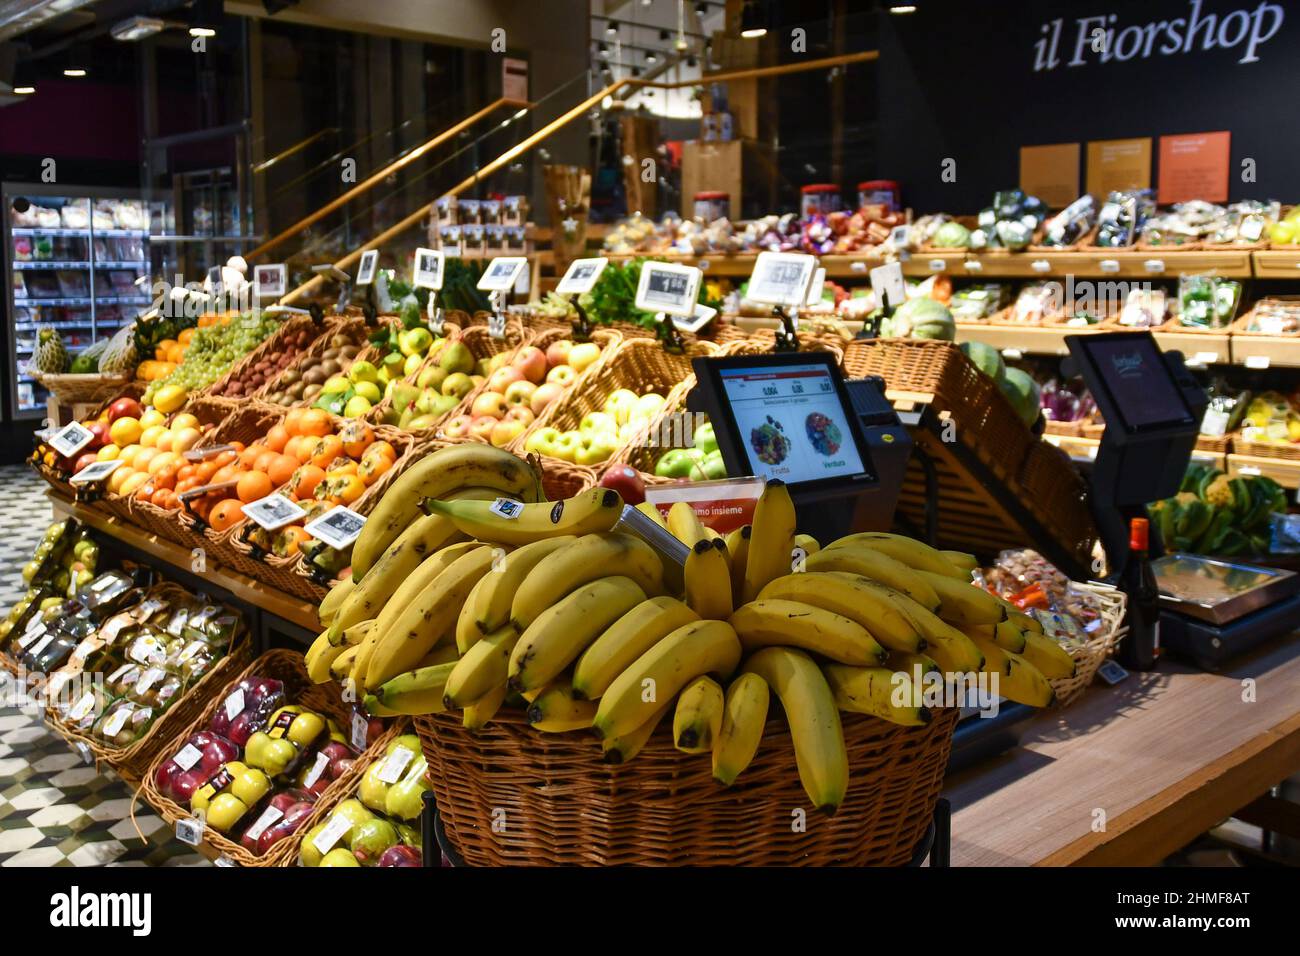 Interior of the grocery store Fiorfood Coop with fruit, vegetables and typical products in Galleria San Federico, Turin, Piedmont, Italy Stock Photo